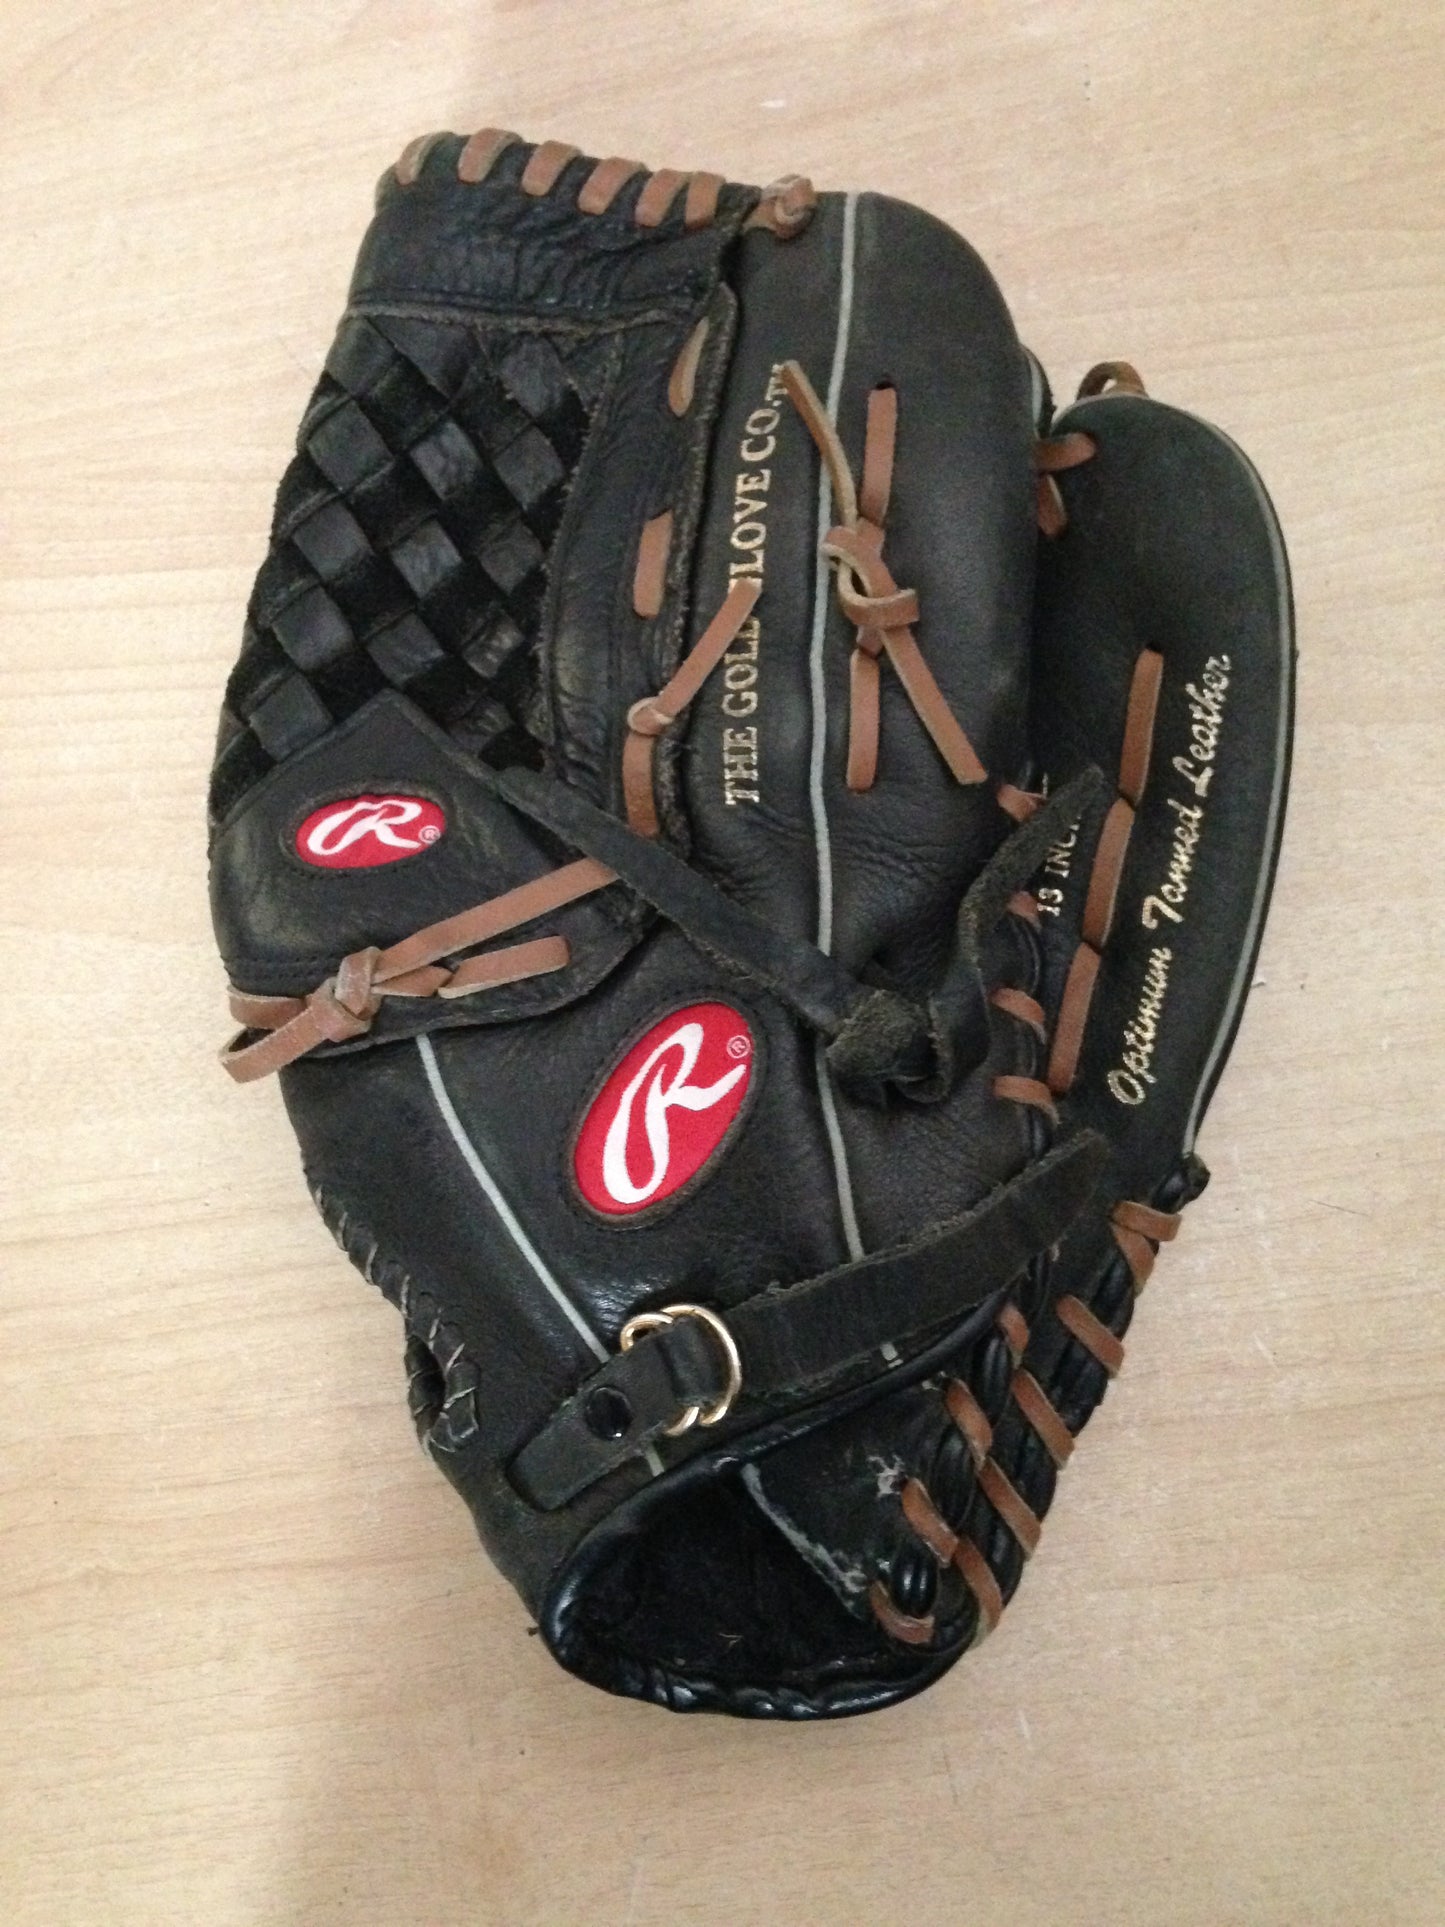 Baseball Glove Adult Size 13 inch Rawlings Black Brown Soft Leather Fits on Left Hand